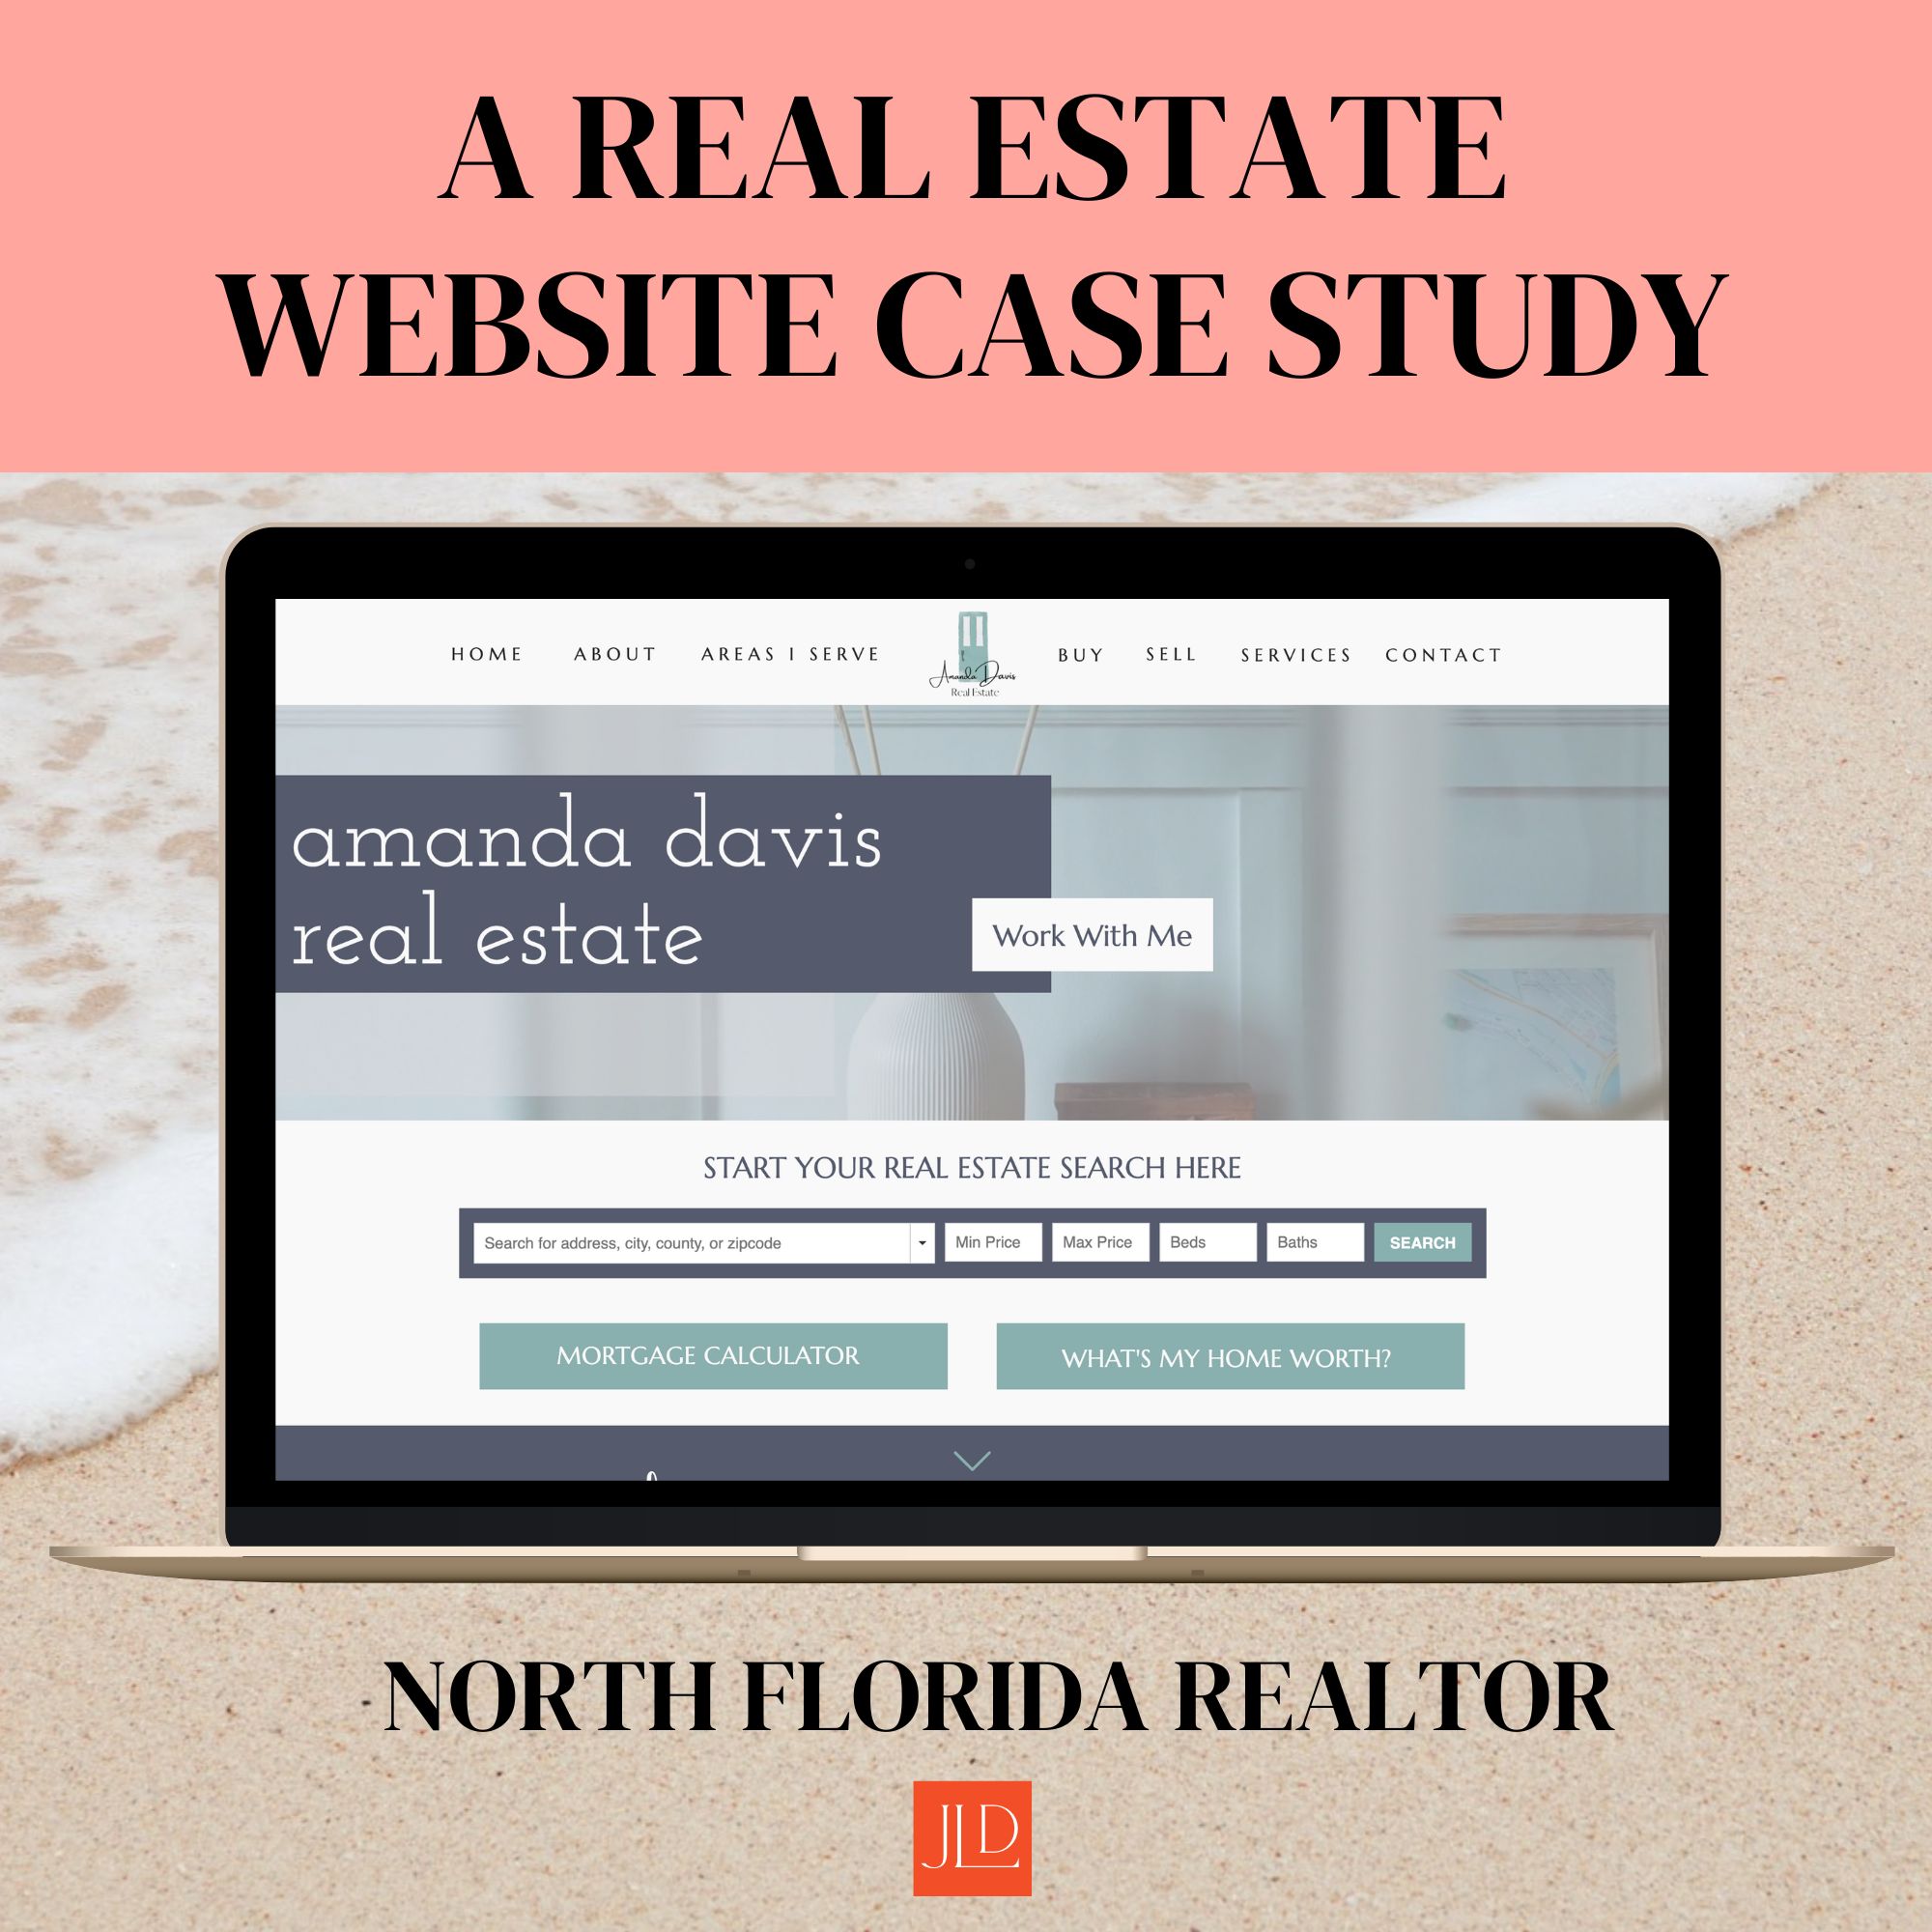 Real Estate Website with IDX Broker Search capabilities | Jenny Laine Designs